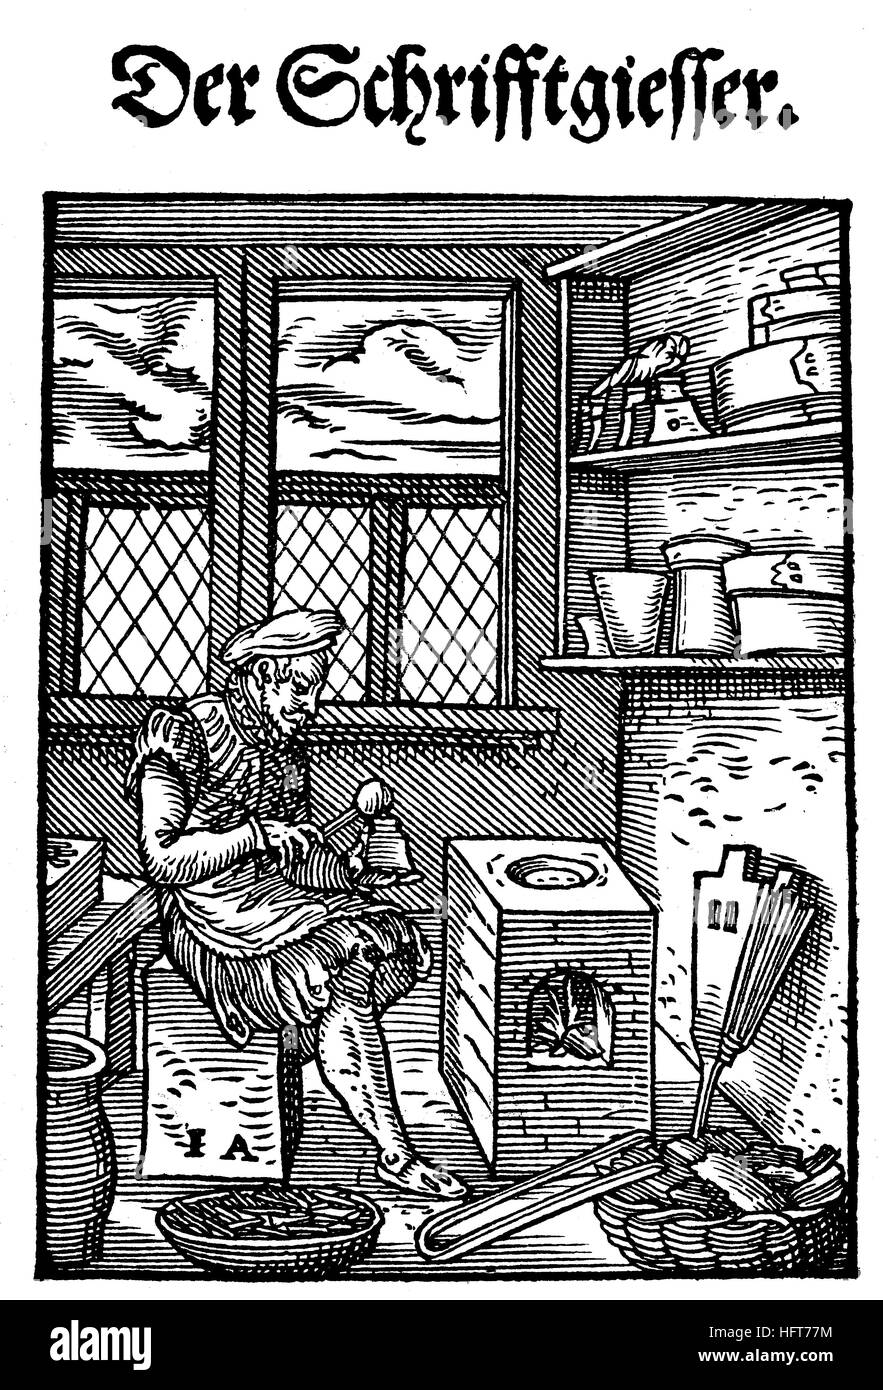 Der Schriftgiesser, type foundry, type founder, Woodcut from the, Das Saendebuch, a famous series of woodcuts of the trades by Amman, 1568, Germany, craft, work, craftsman, woodcut from the year 1885, digital improved Stock Photo